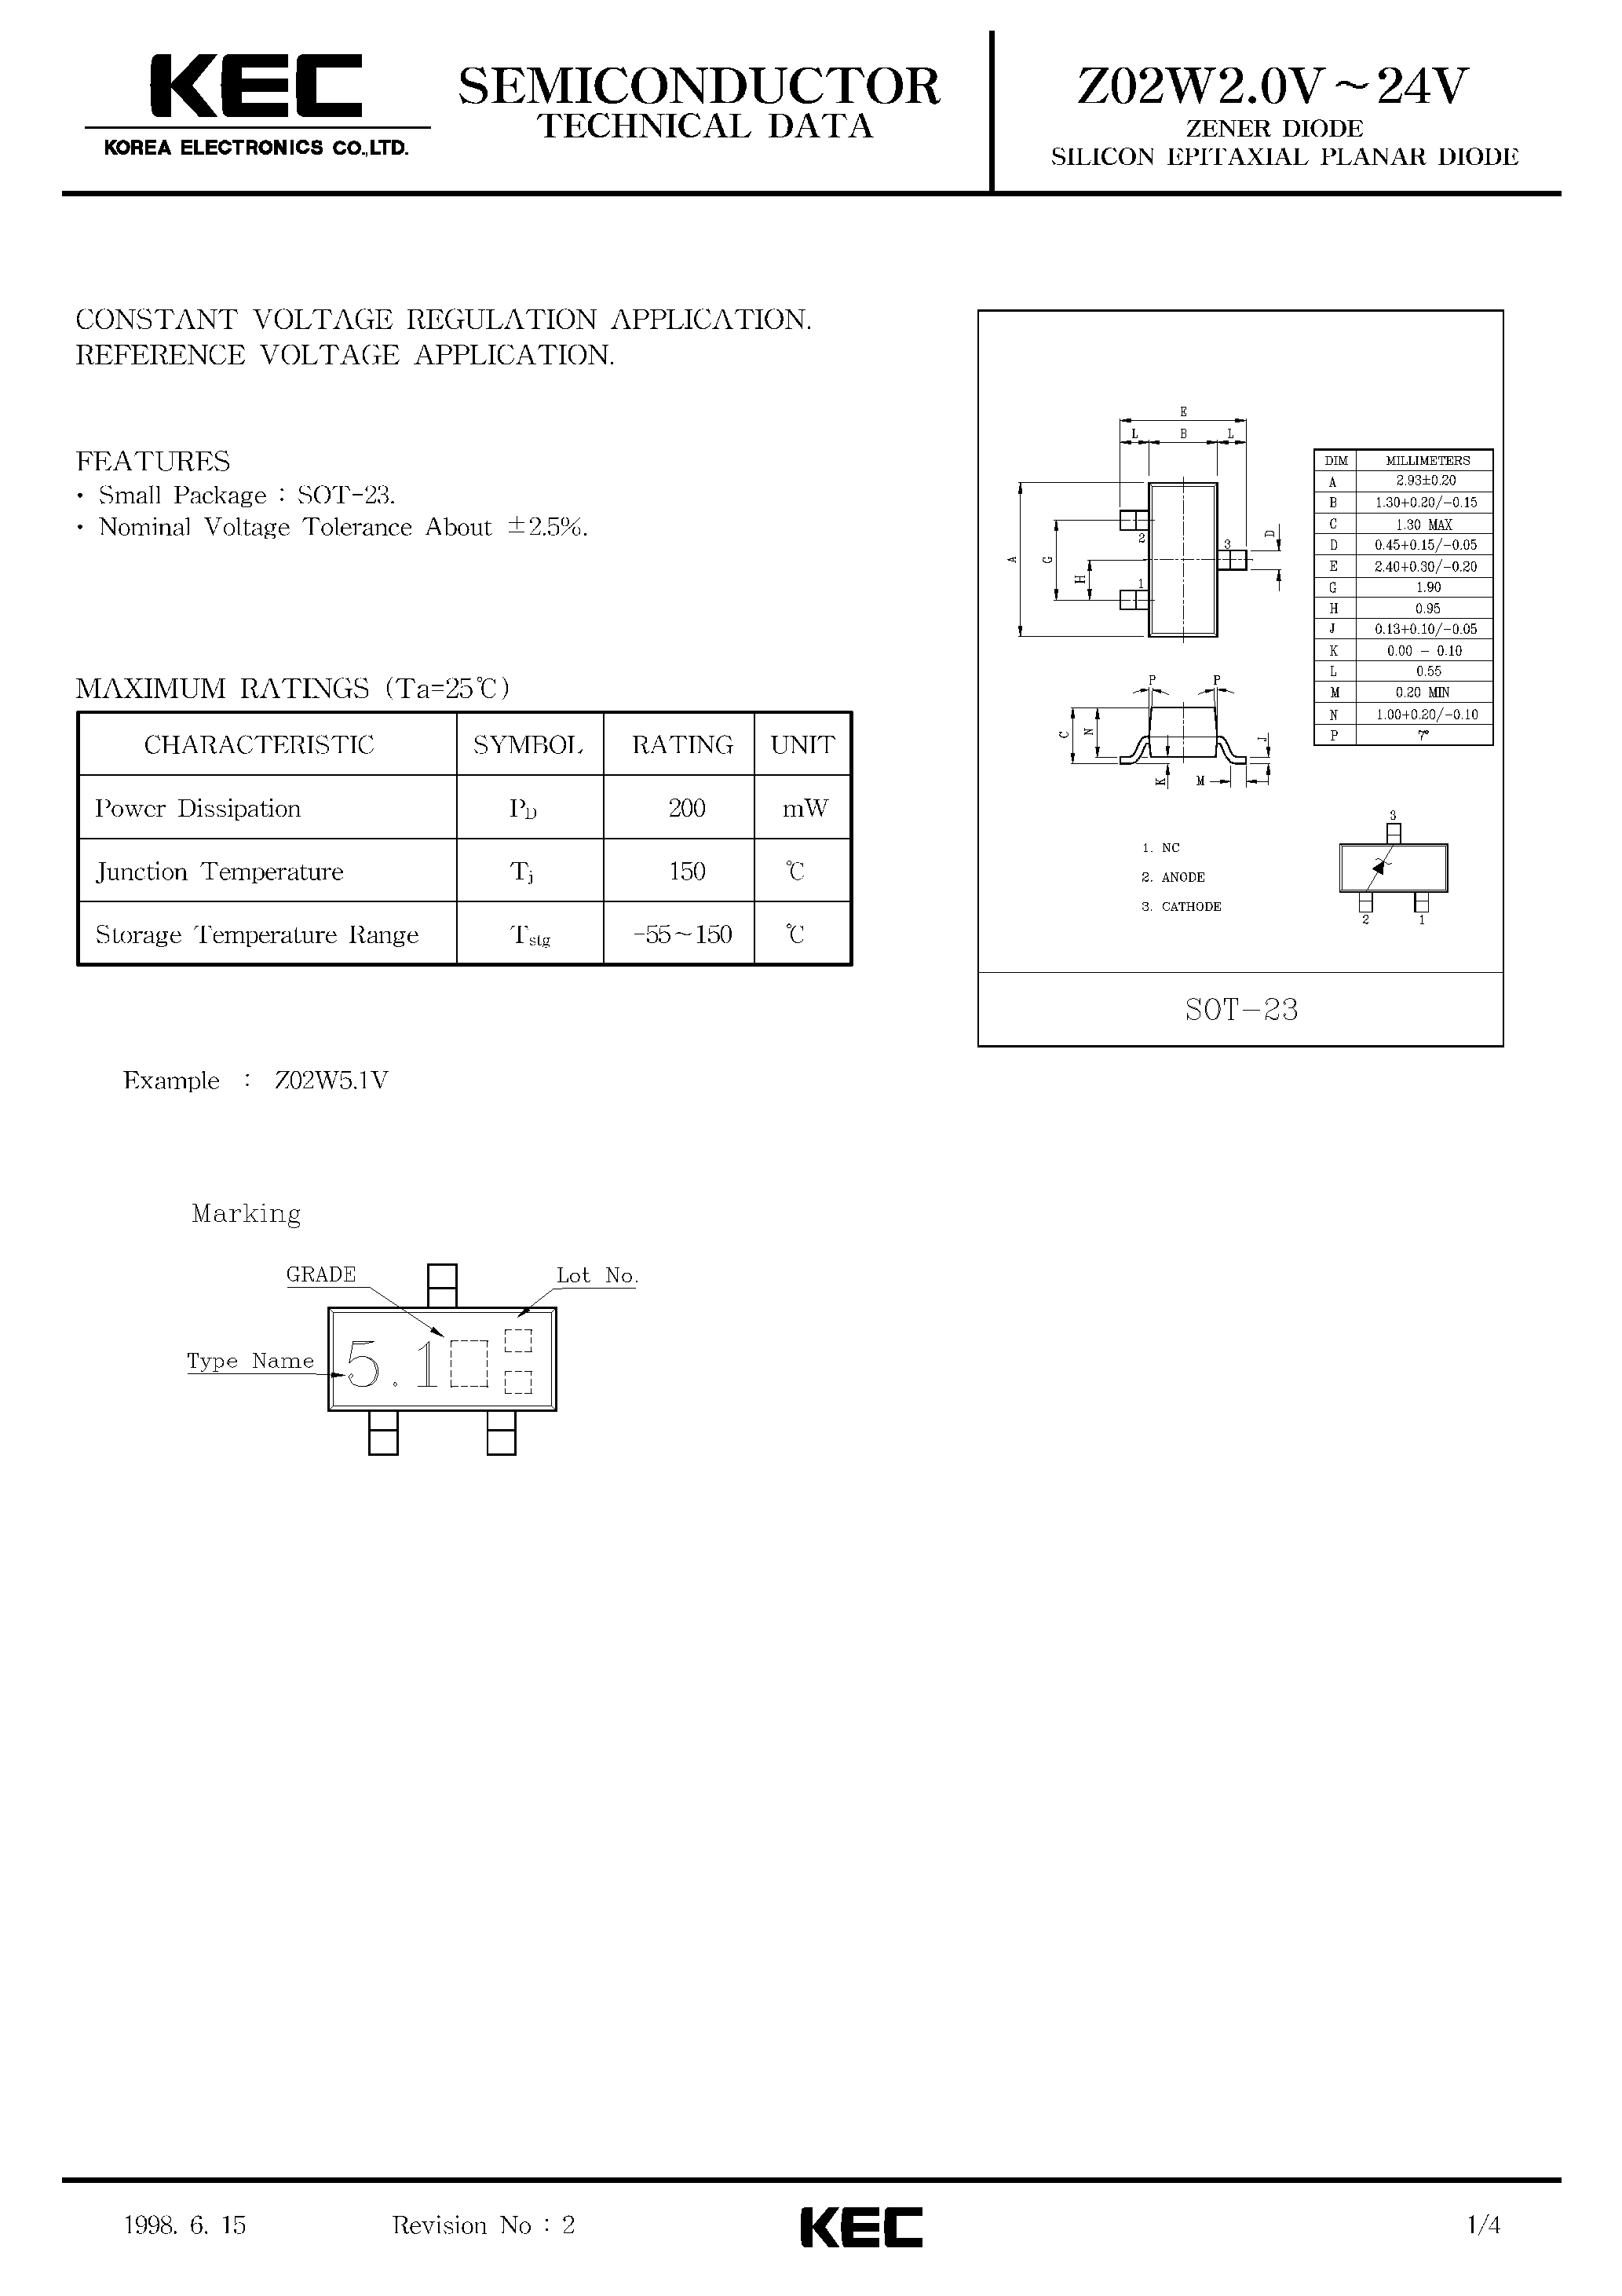 Datasheet Z02W22V - ZENER DIODE SILICON EPITAXIAL PLANAR DIODE page 1